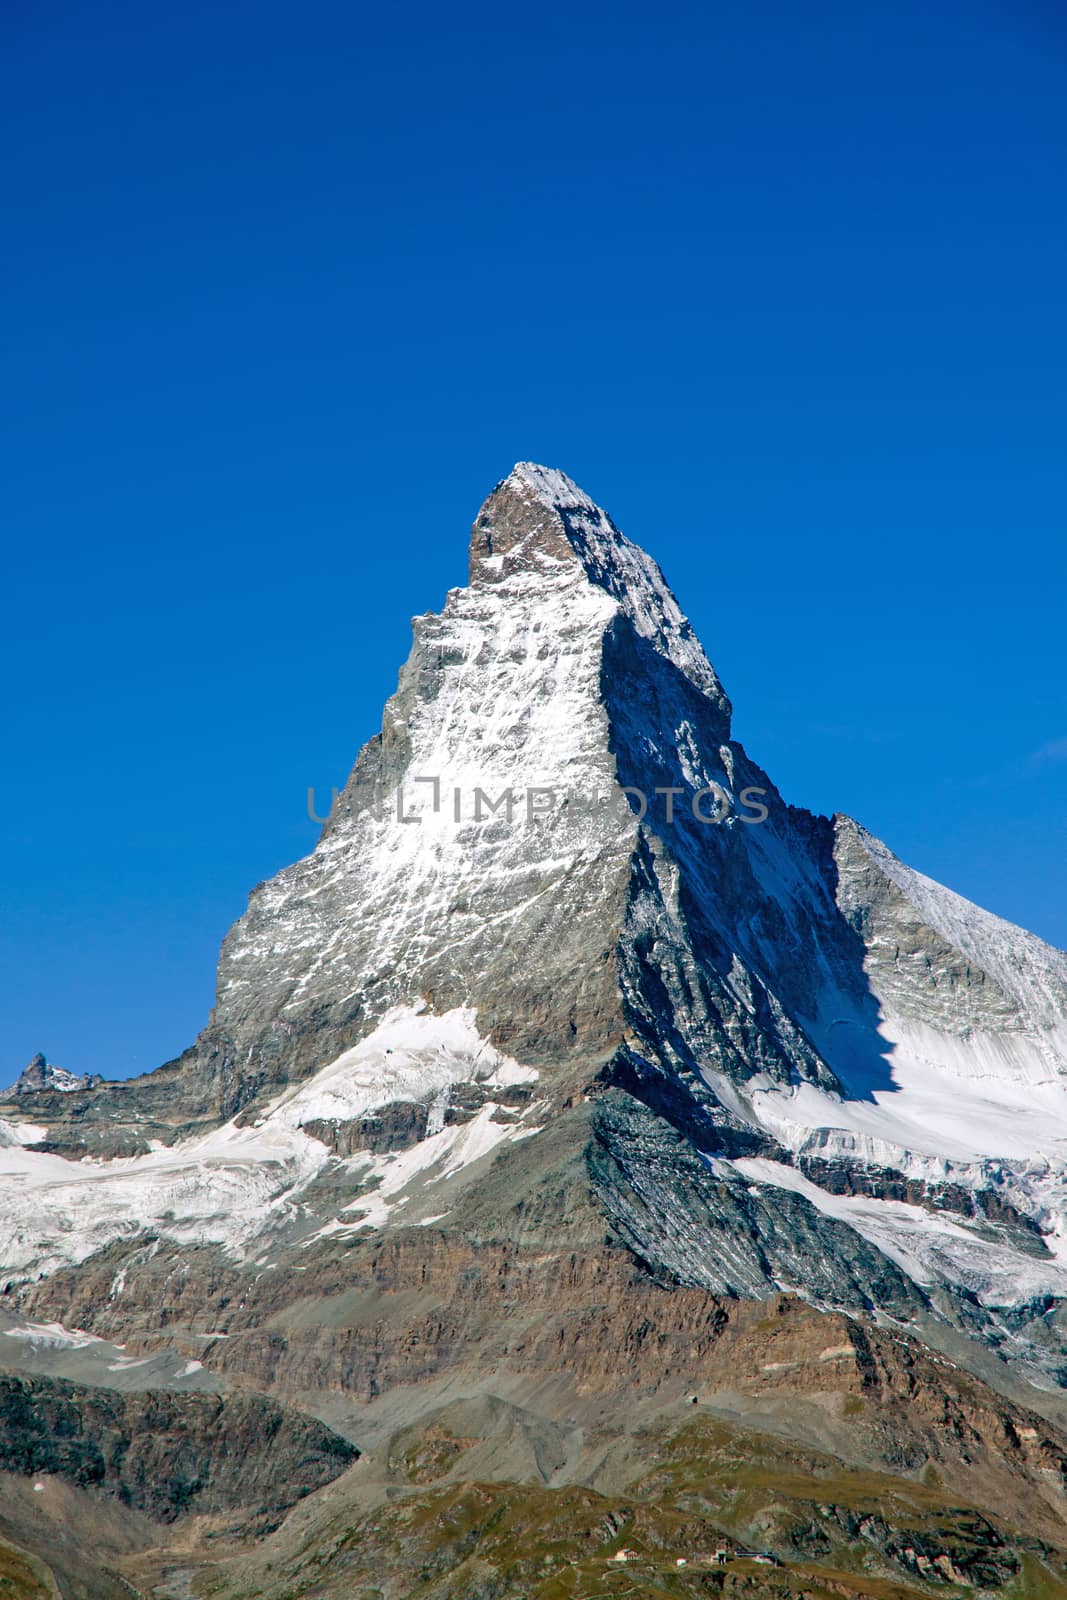 The perfect pyramid of the Matterhorn in the swiss alps